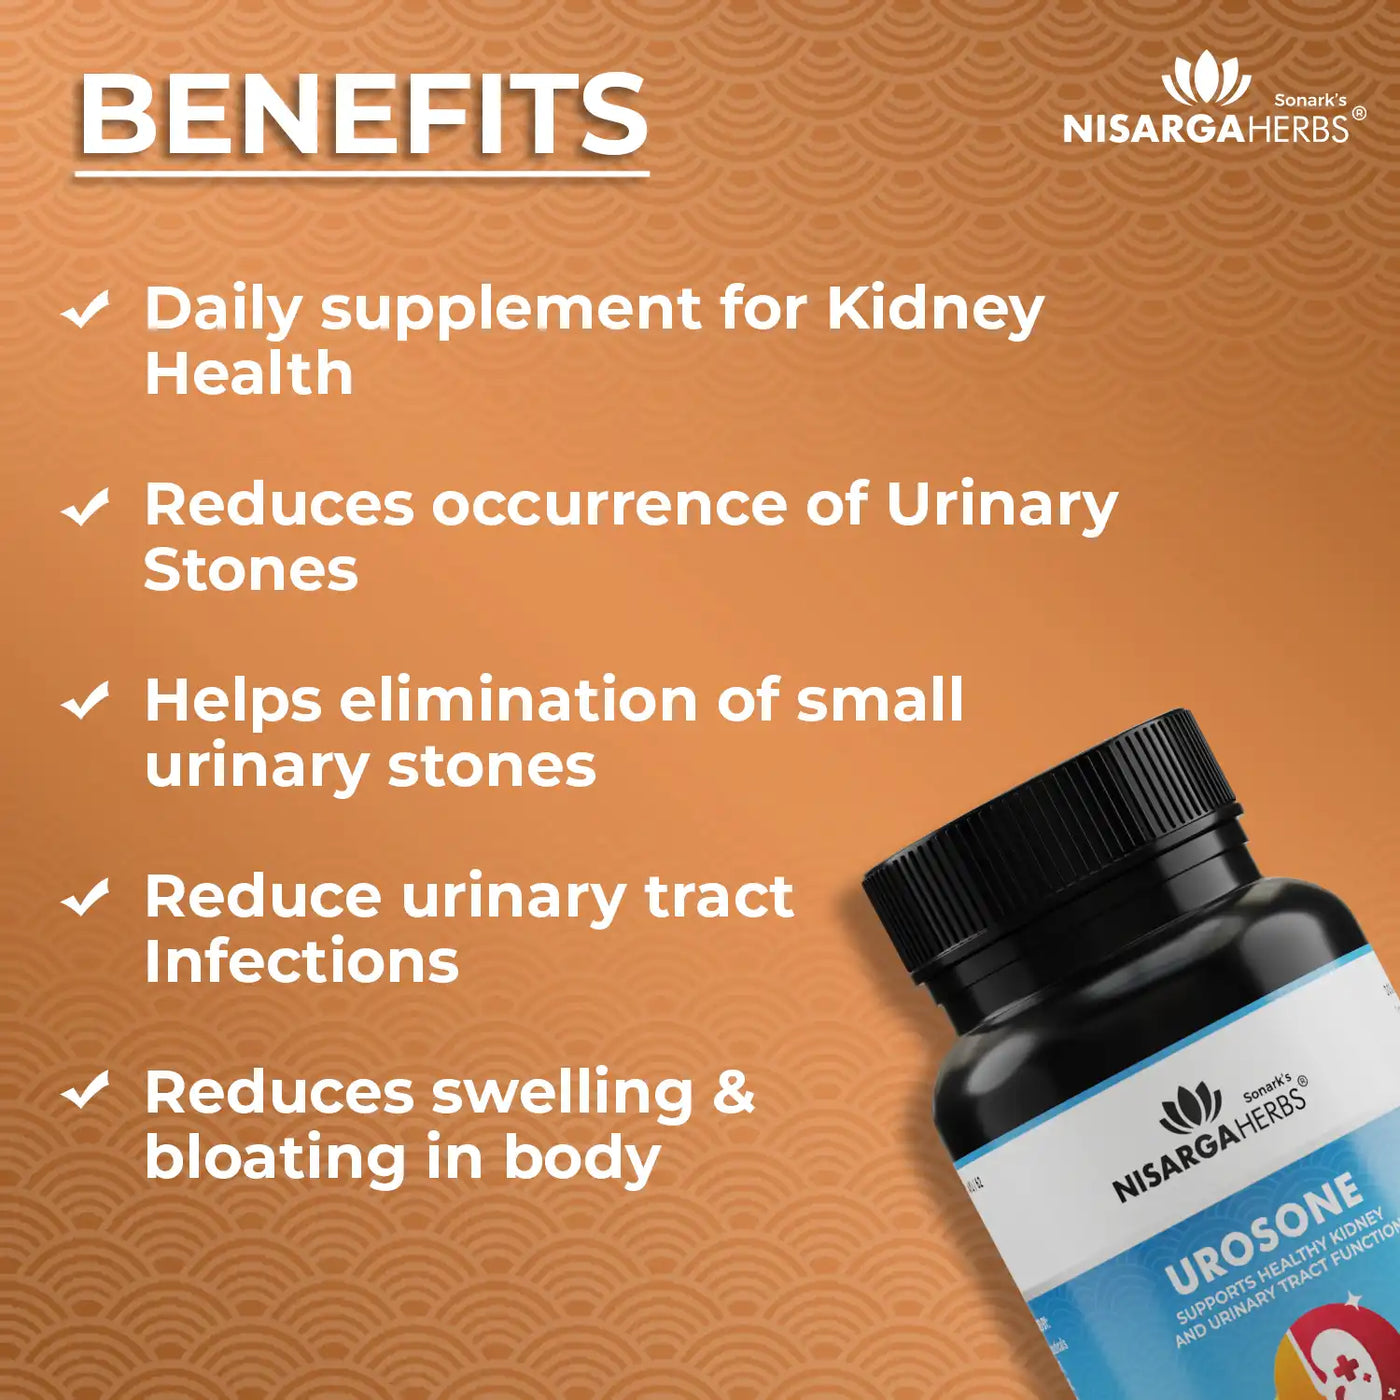 urosone helps reducing kidney stone formation and helps in elimination. reduces severity and chances of urinary tract infections and reduces swelling and bloating in body. 